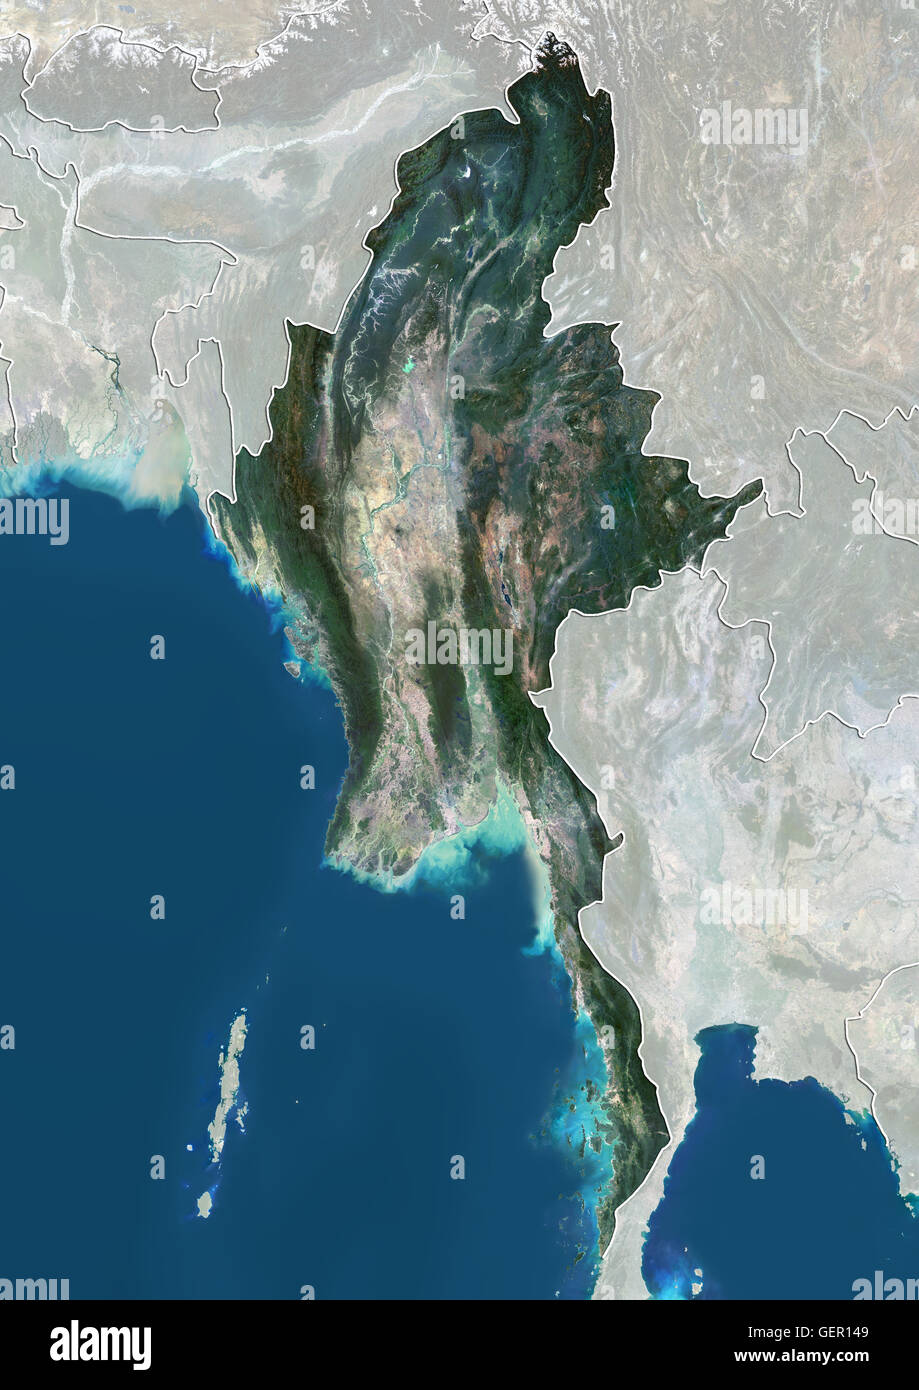 Satellite view of Myanmar (with country boundaries and mask). This image was compiled from data acquired by Landsat 8 satellite in 2014. Stock Photo